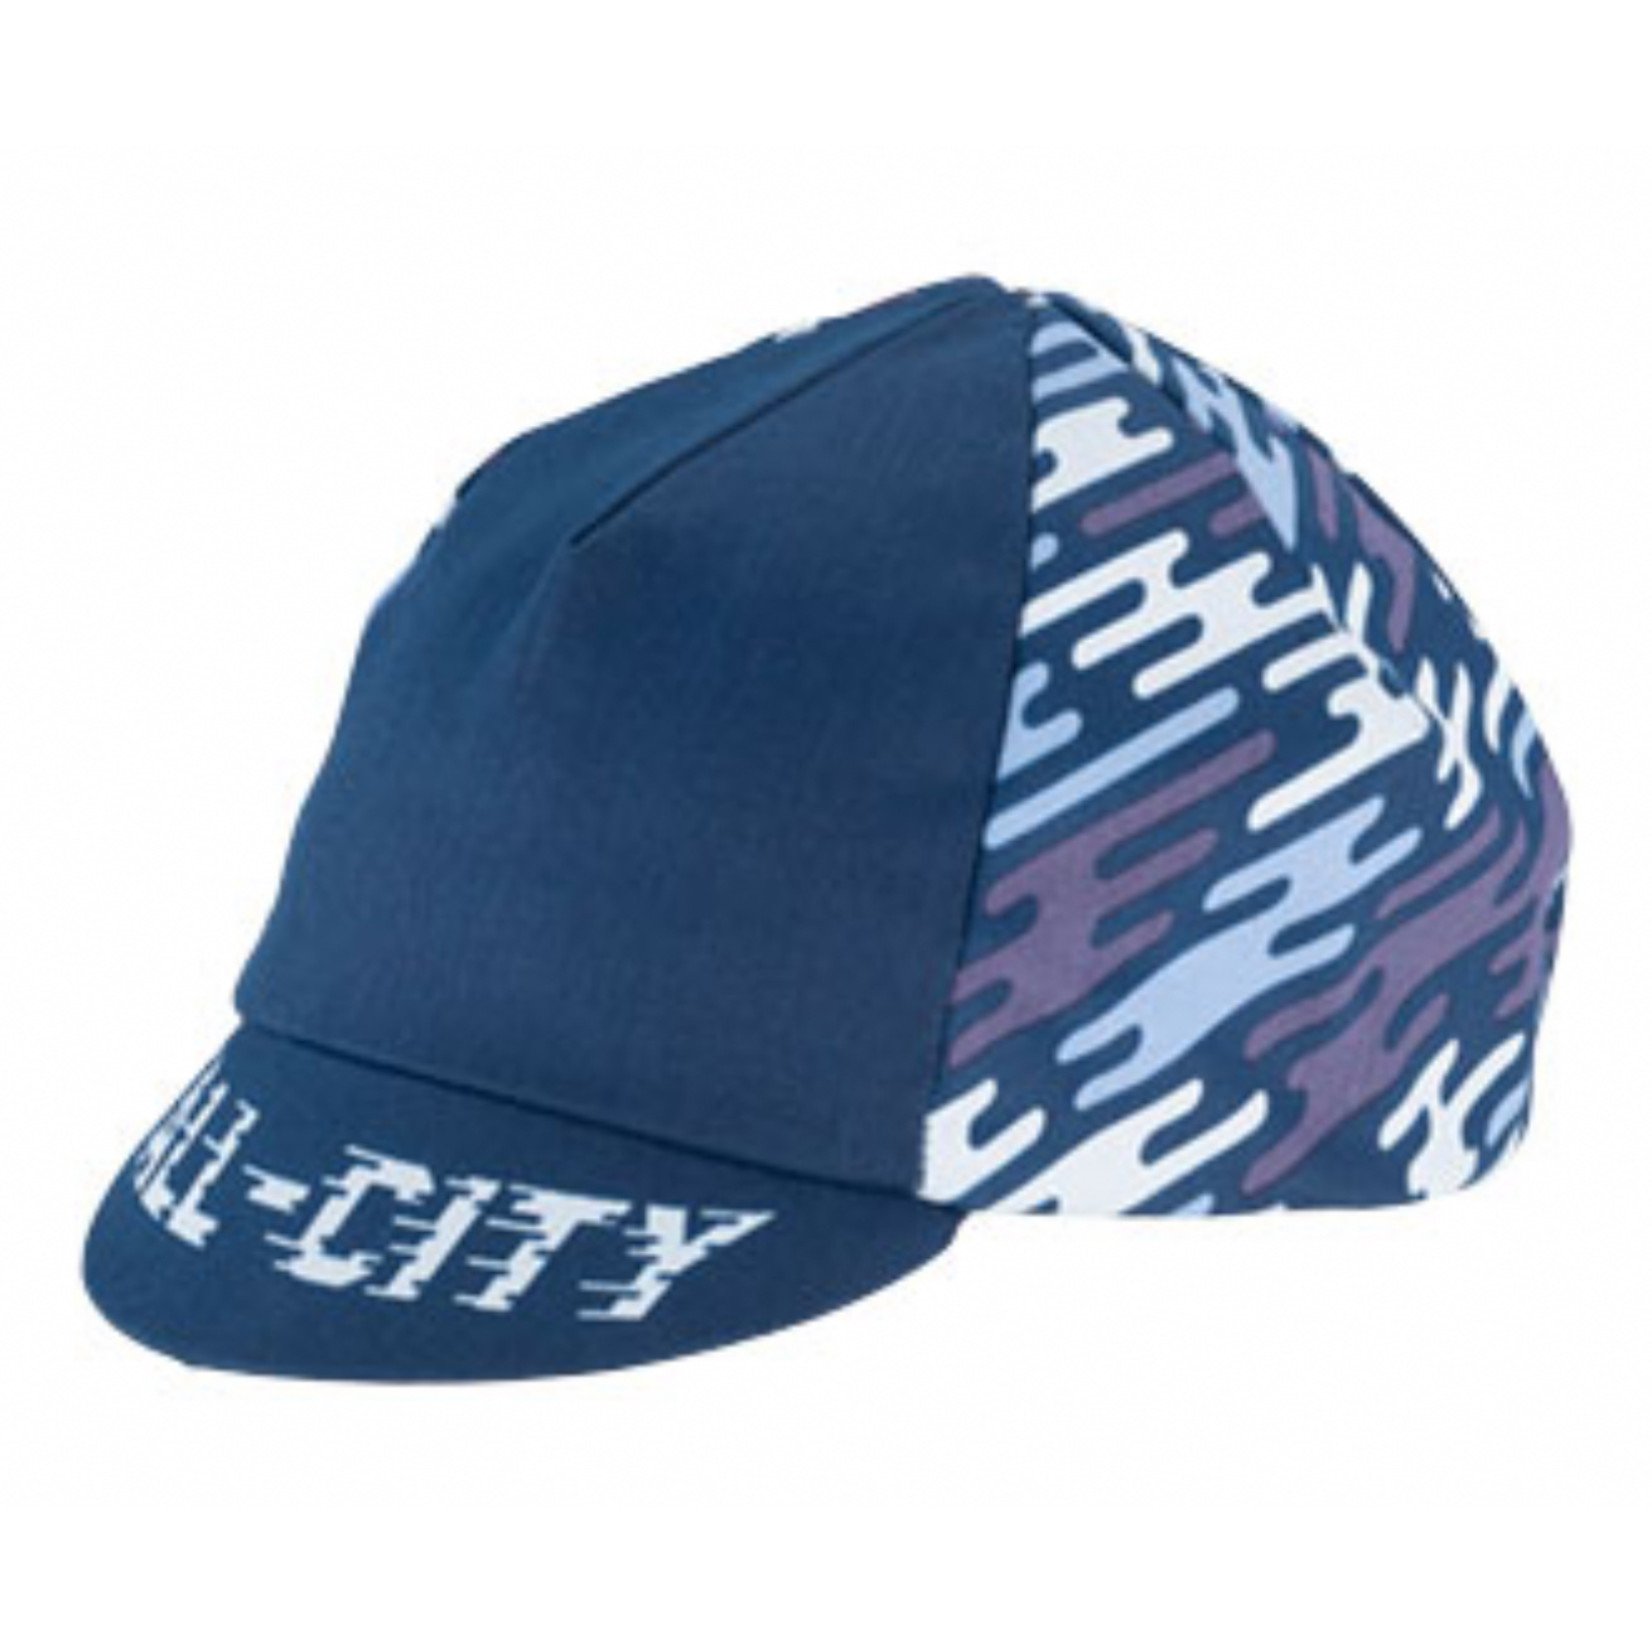 All-City All-City Flow Motion Cycling Cap - Blue, One Size